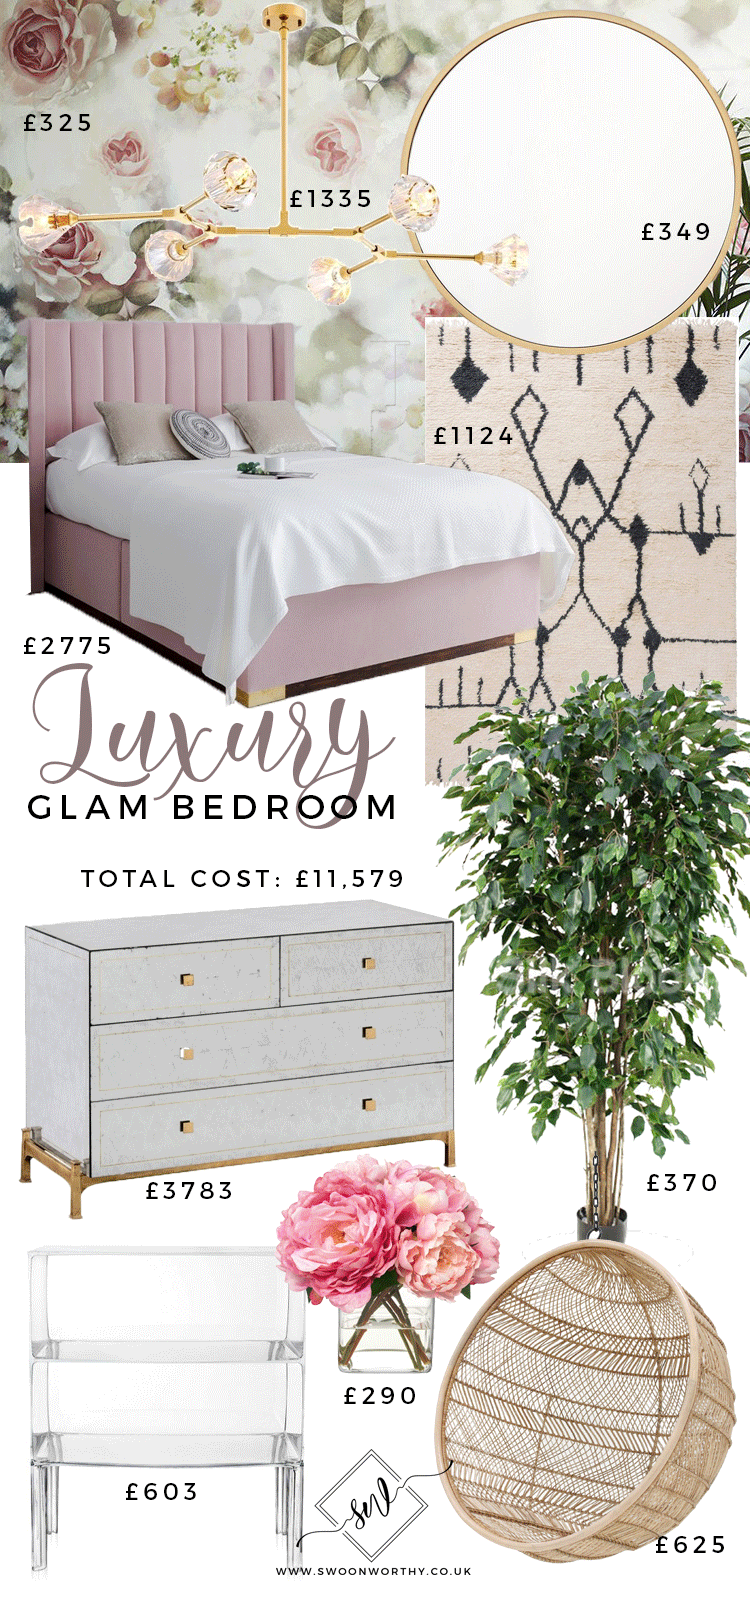 1-Glam-Bedroom-3-Different-Budgets-Gif-slower